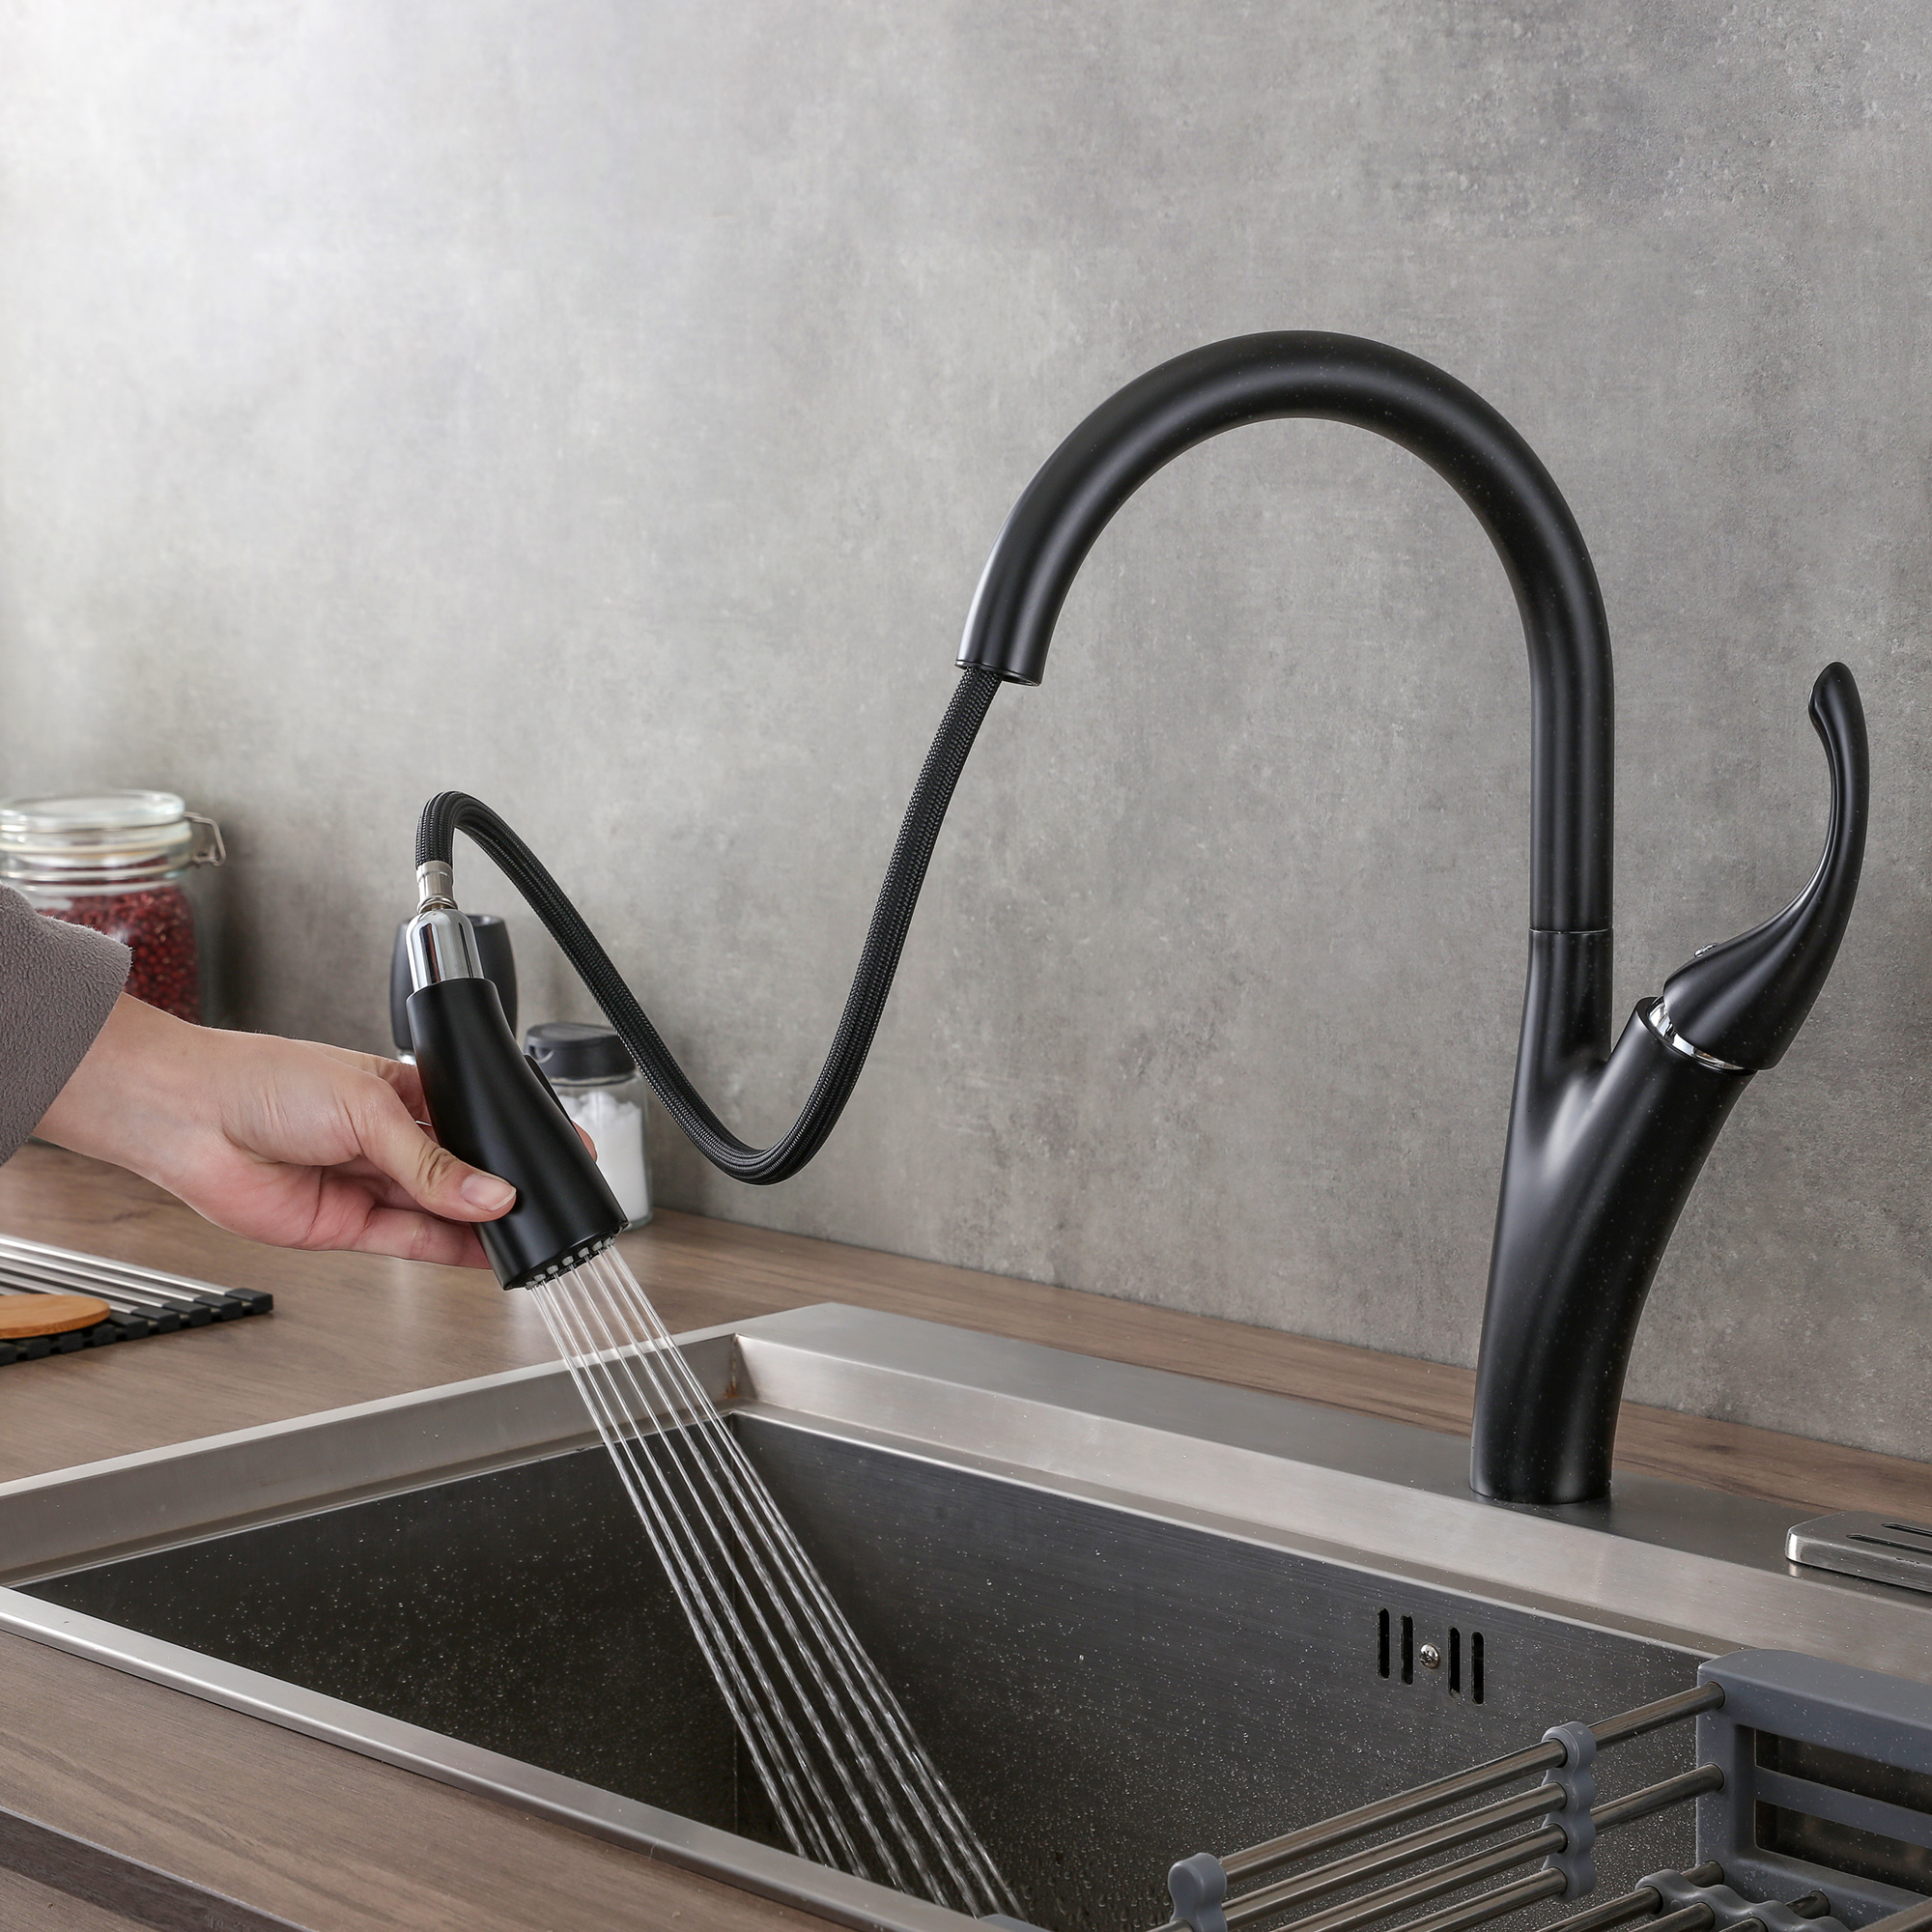 Pull Out Head Factory Price Matt Black Zamak Fashion Style Durable Sink Water Faucet